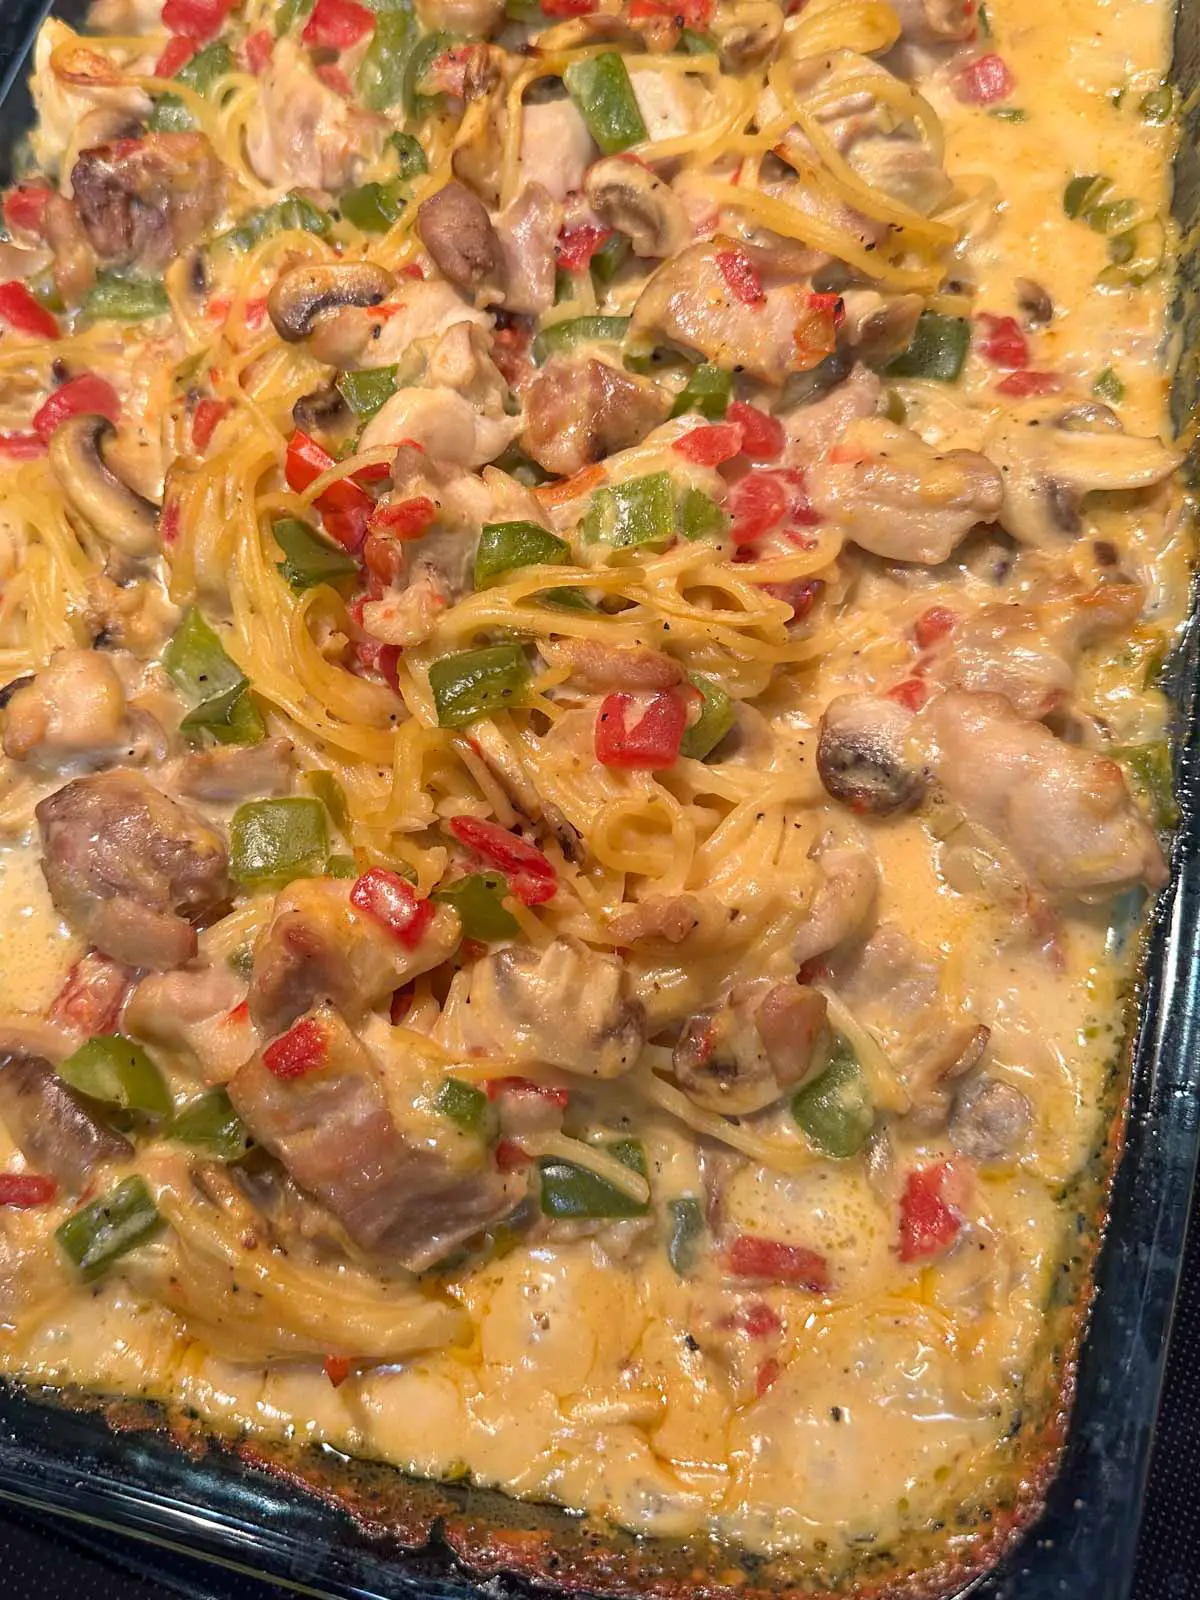 A glass casserole dish containing Texas Chicken Spaghetti which is spaghetti in a creamy sauce with tomatoes, mushrooms, chicken green chilies, and green bell peppers.